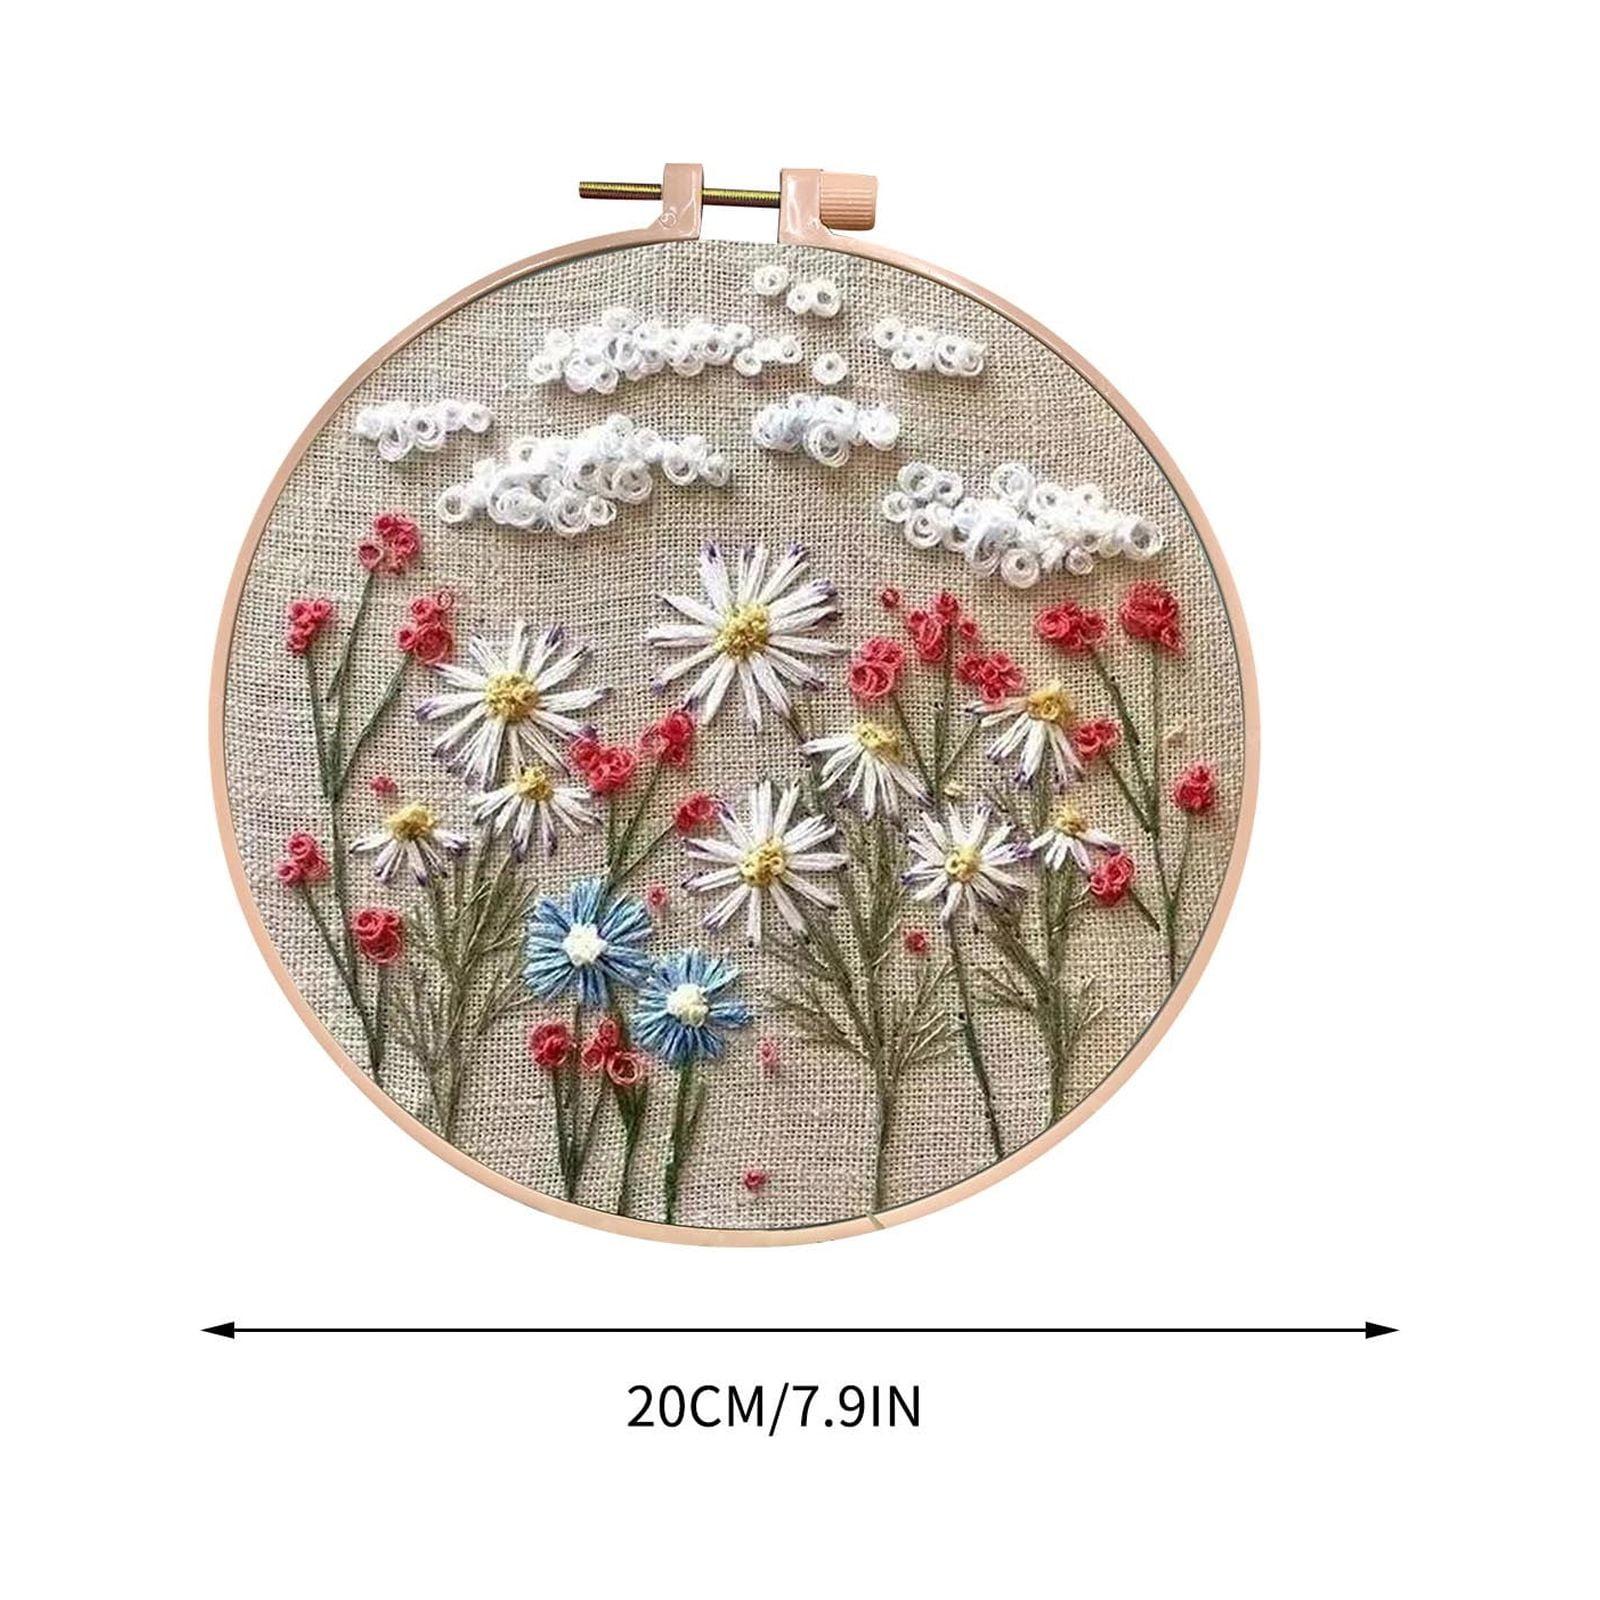 Embroidery Kit, Cross Stitch Kit for Beginners Hand Embroidery